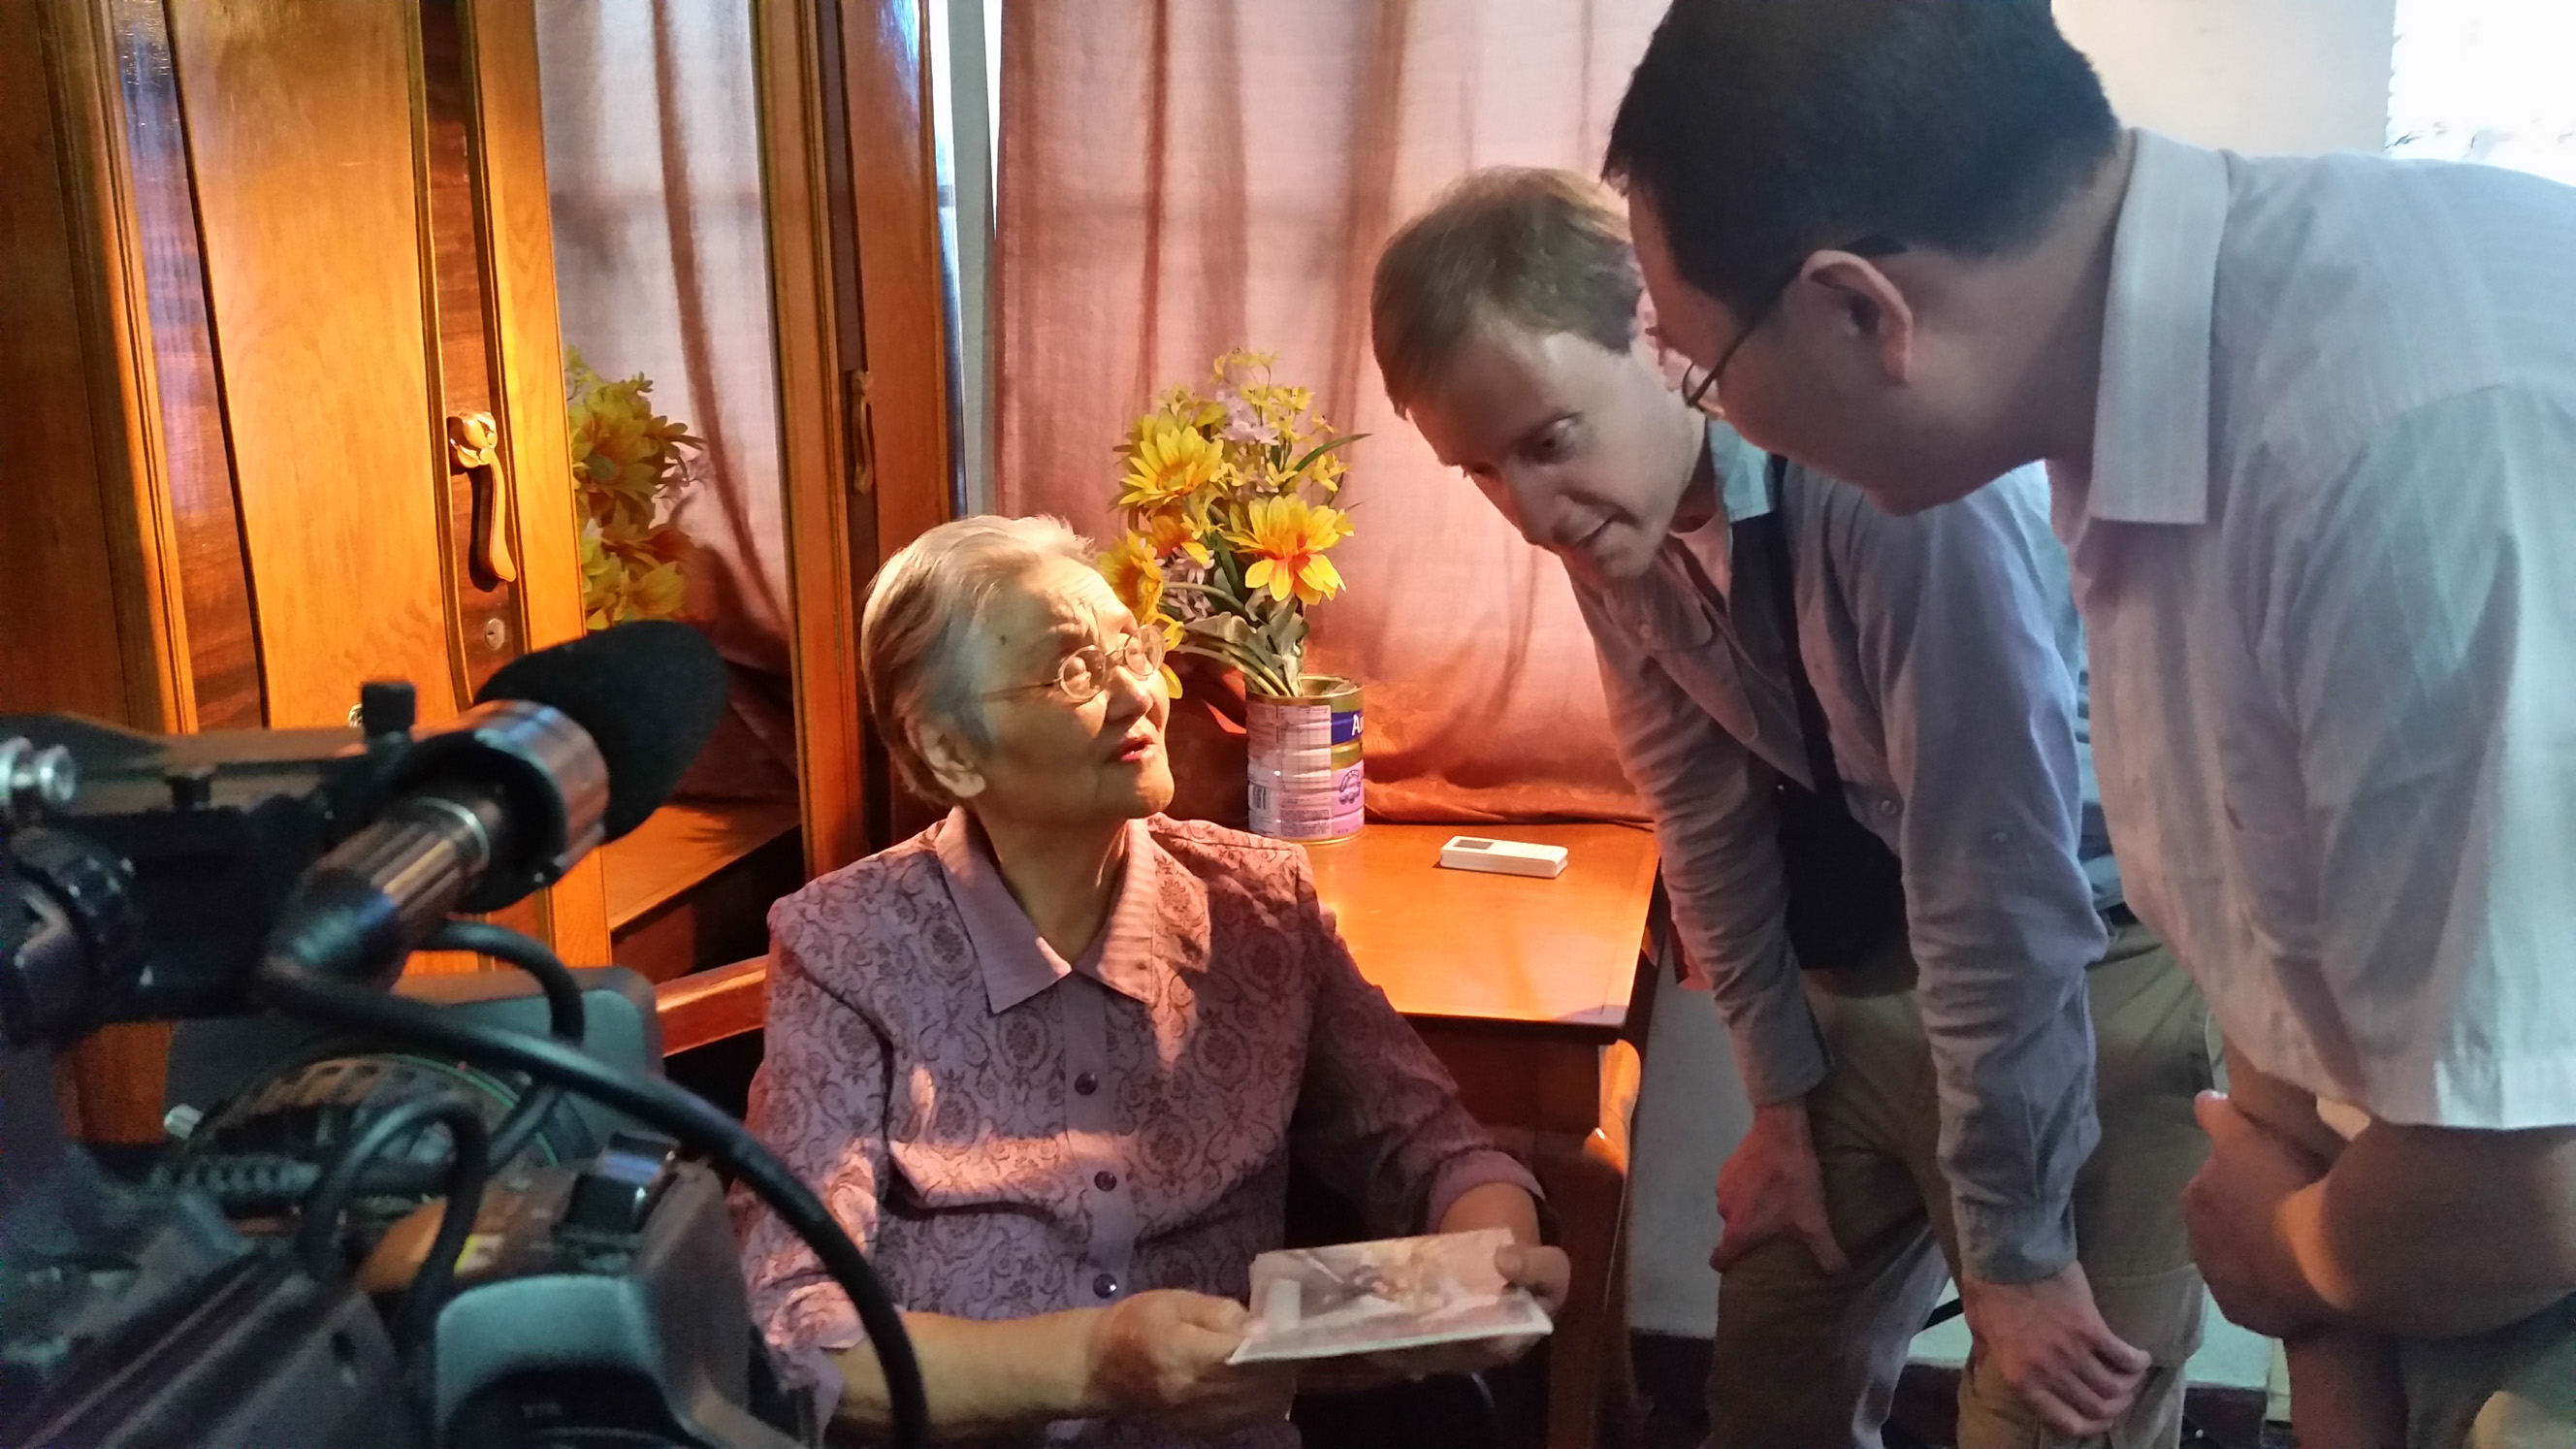 Staff traveled to China to record 18 new testimonies for the Nanjing Massacre collection.